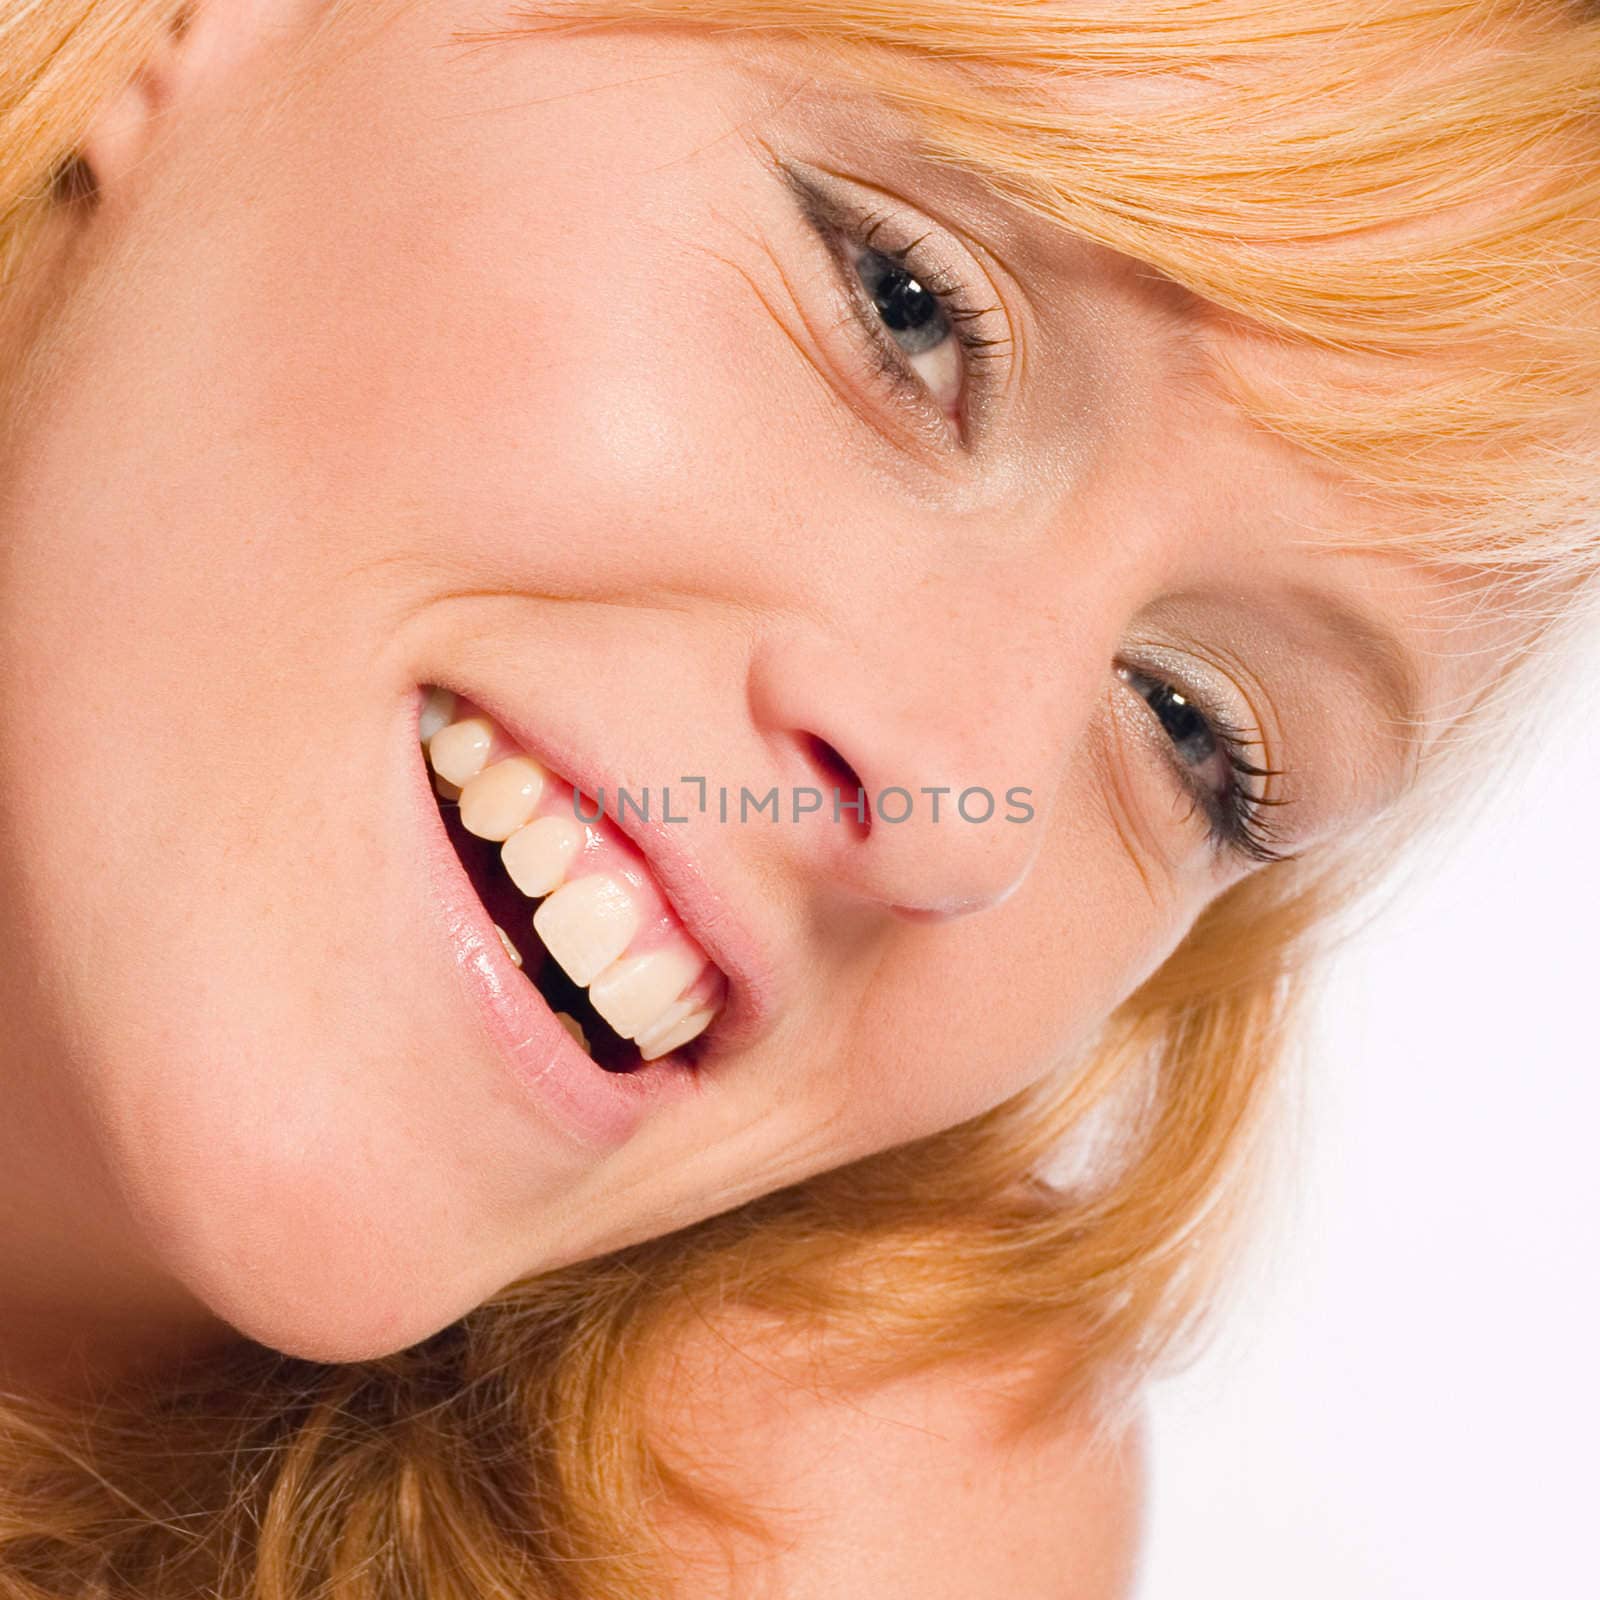 Studio portrait of a red haired model smiling